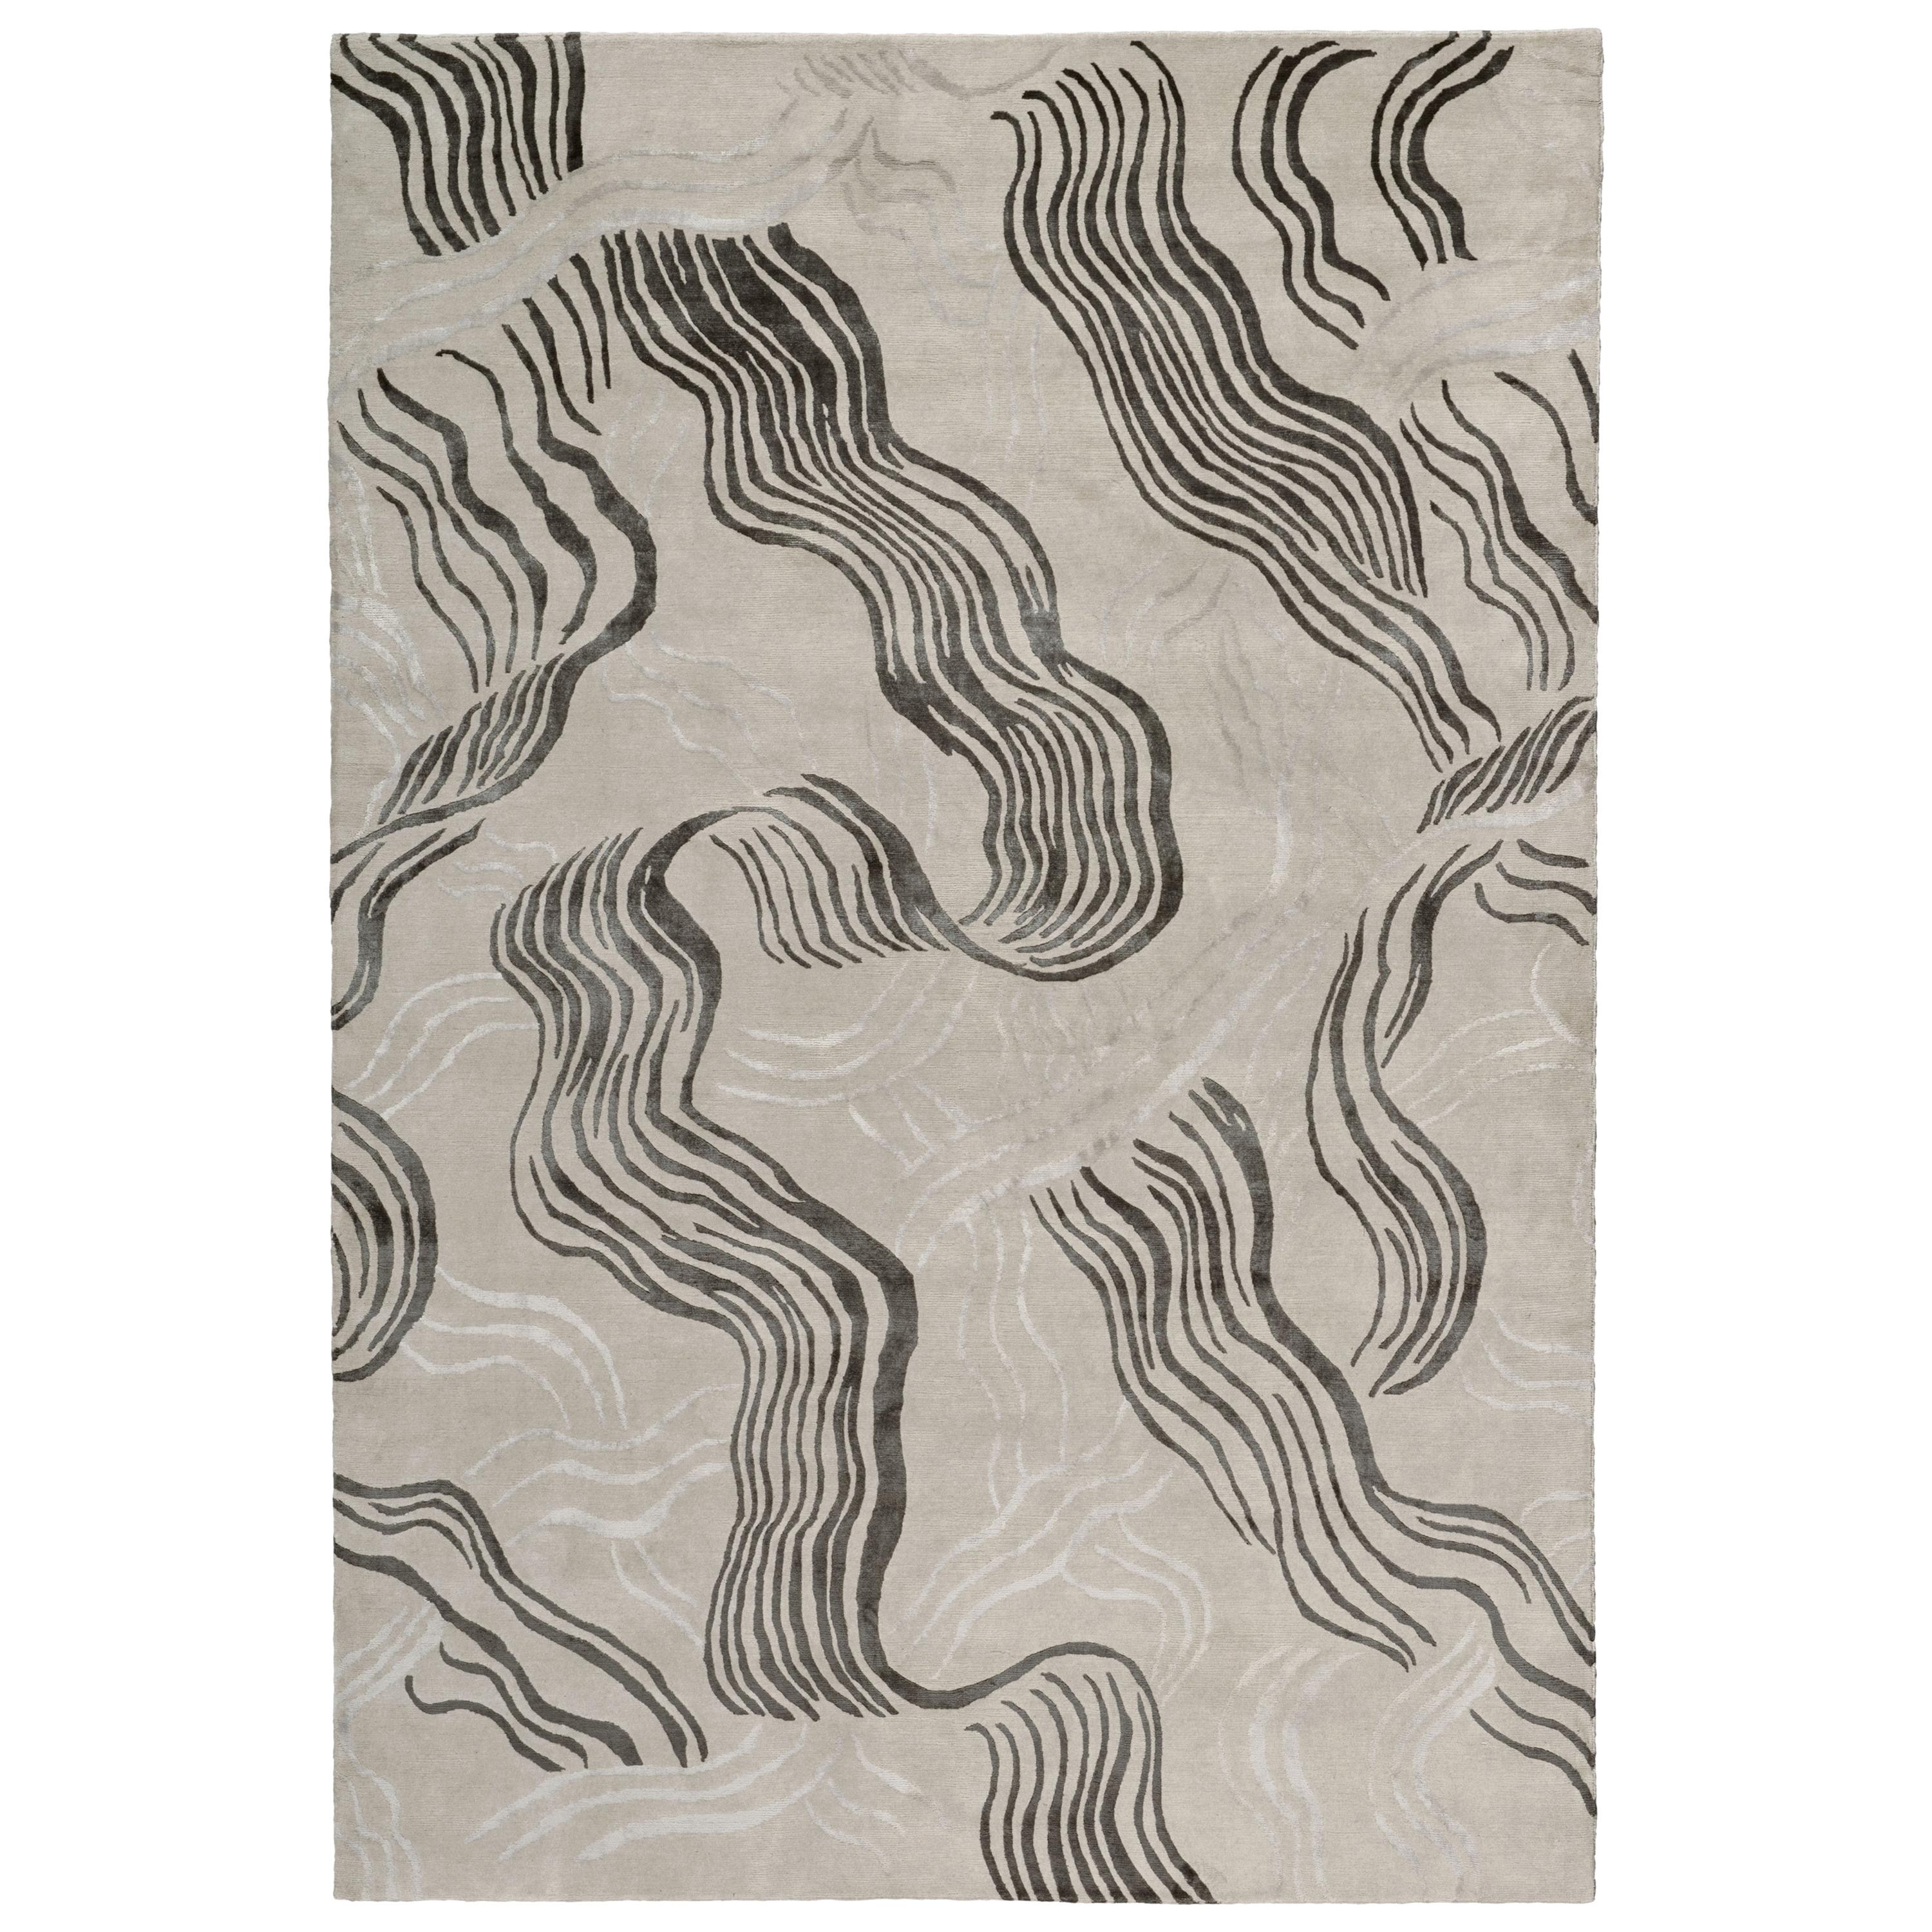 Wake Hand-Knotted 10x8 Rug in Wool and Silk by Kelly Wearstler